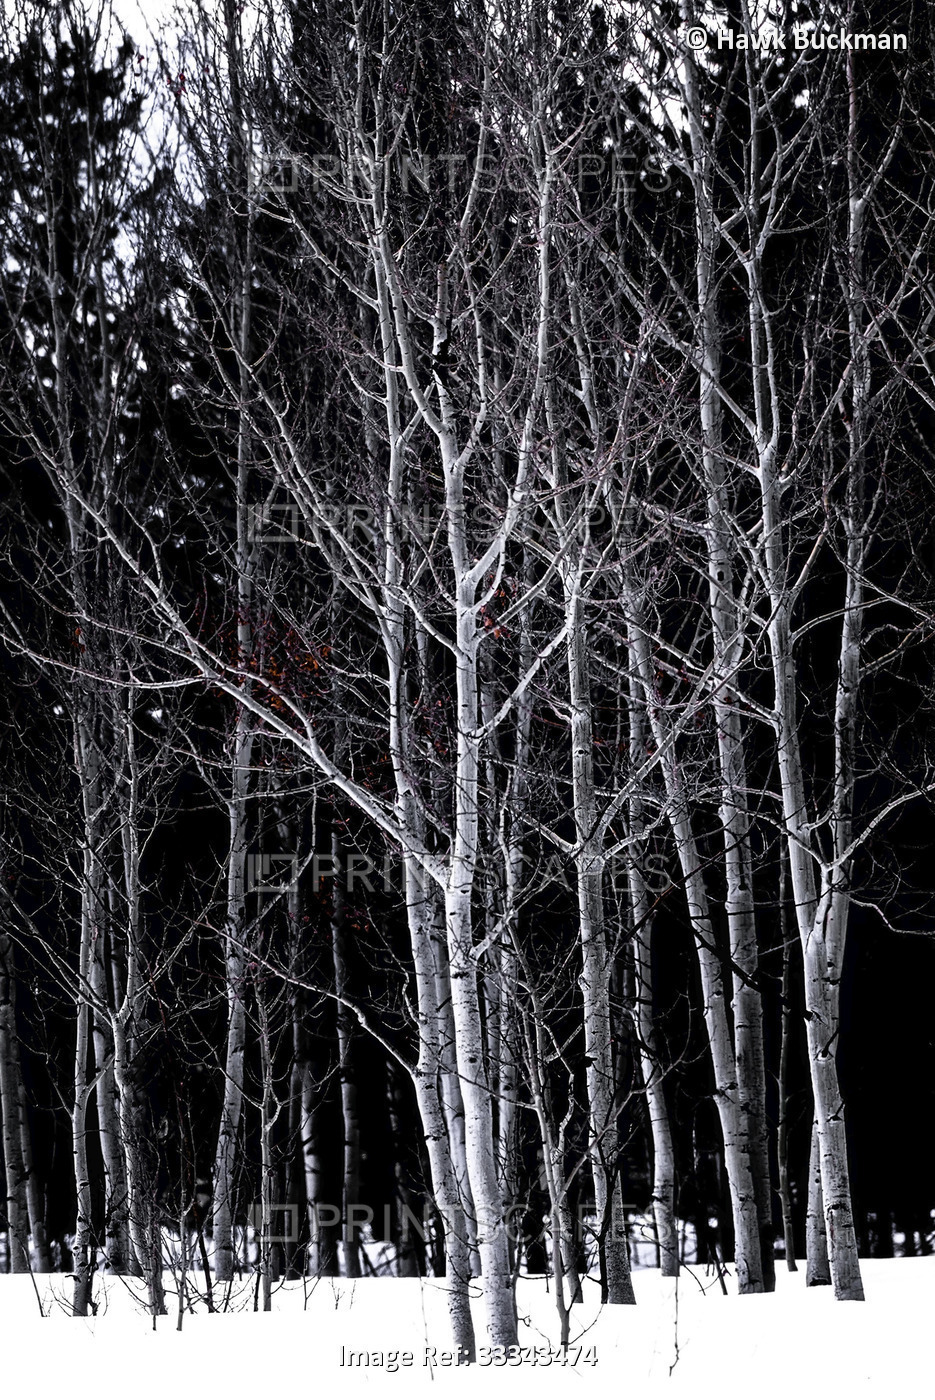 Leafless Aspen trees in winter in a forest along Old Fall River Road in Rocky ...